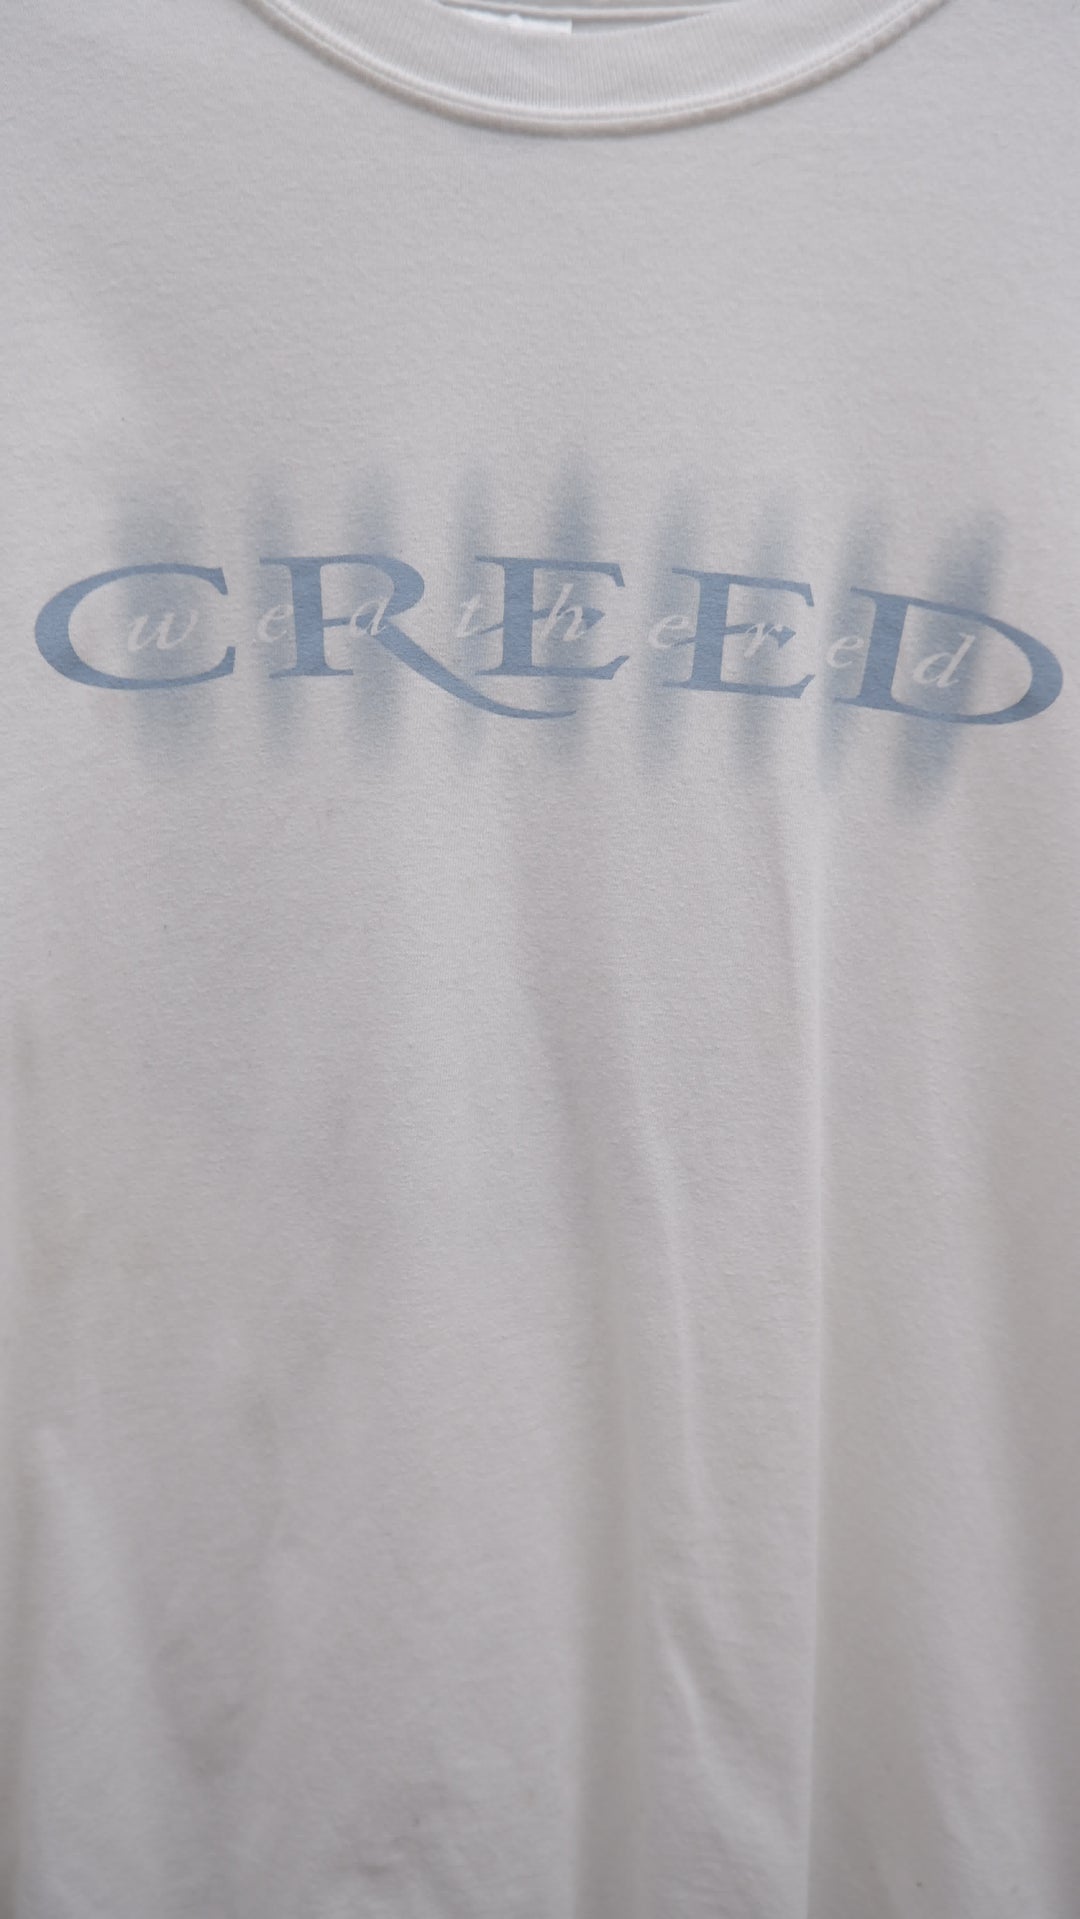 Vintage Creed Weathered Band T-Shirt